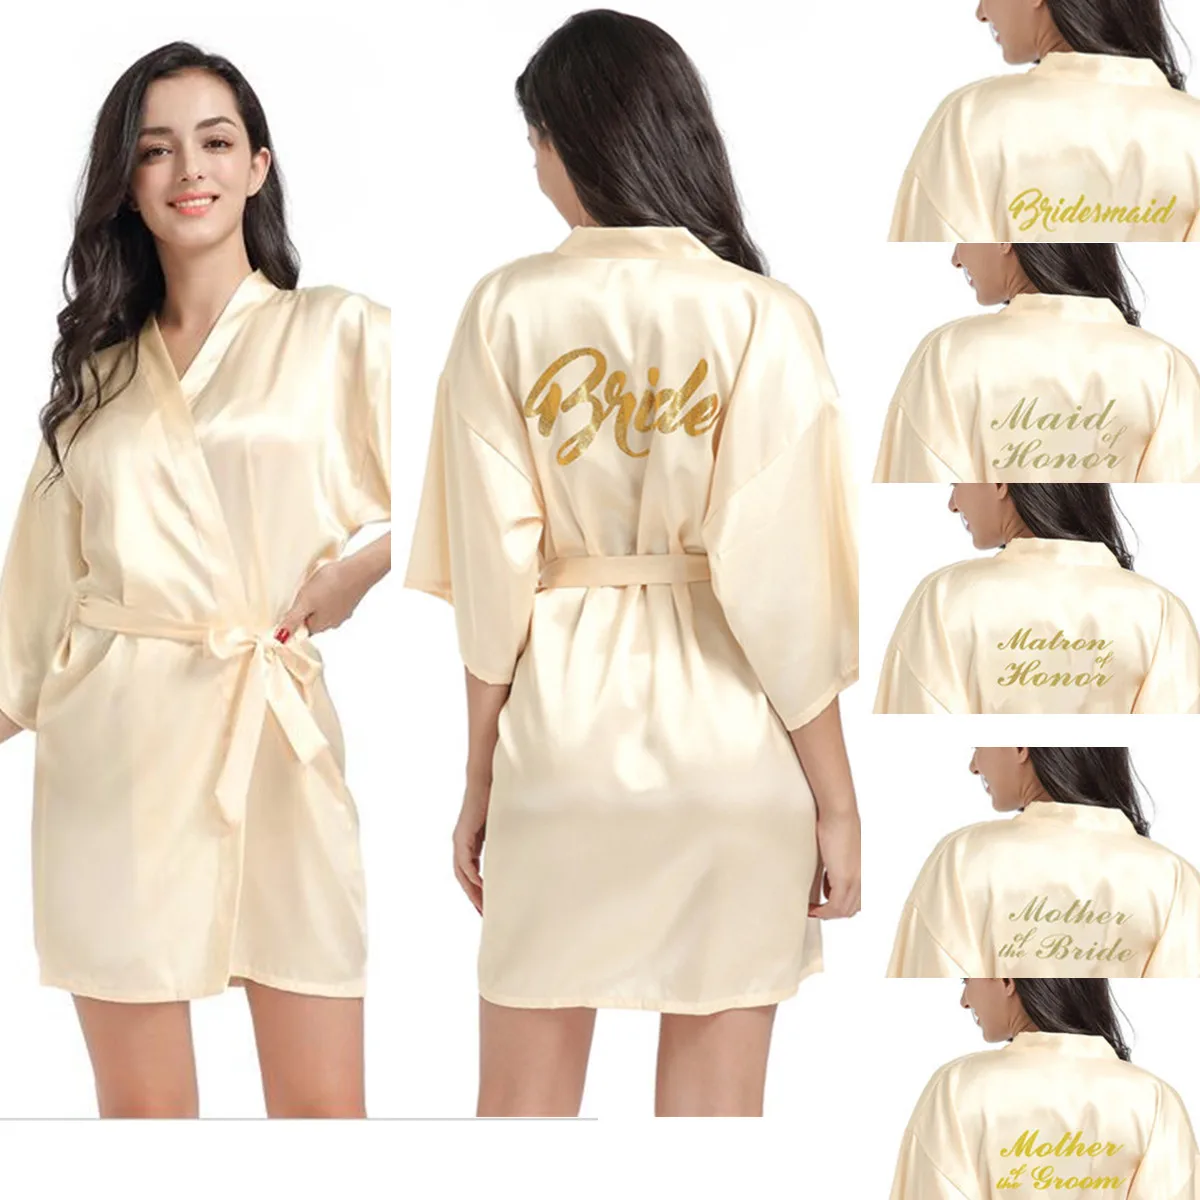 Champagne robe gold writing kimono bridal party robe bridesmaid sister mother of the groom bride robes wedding best gift